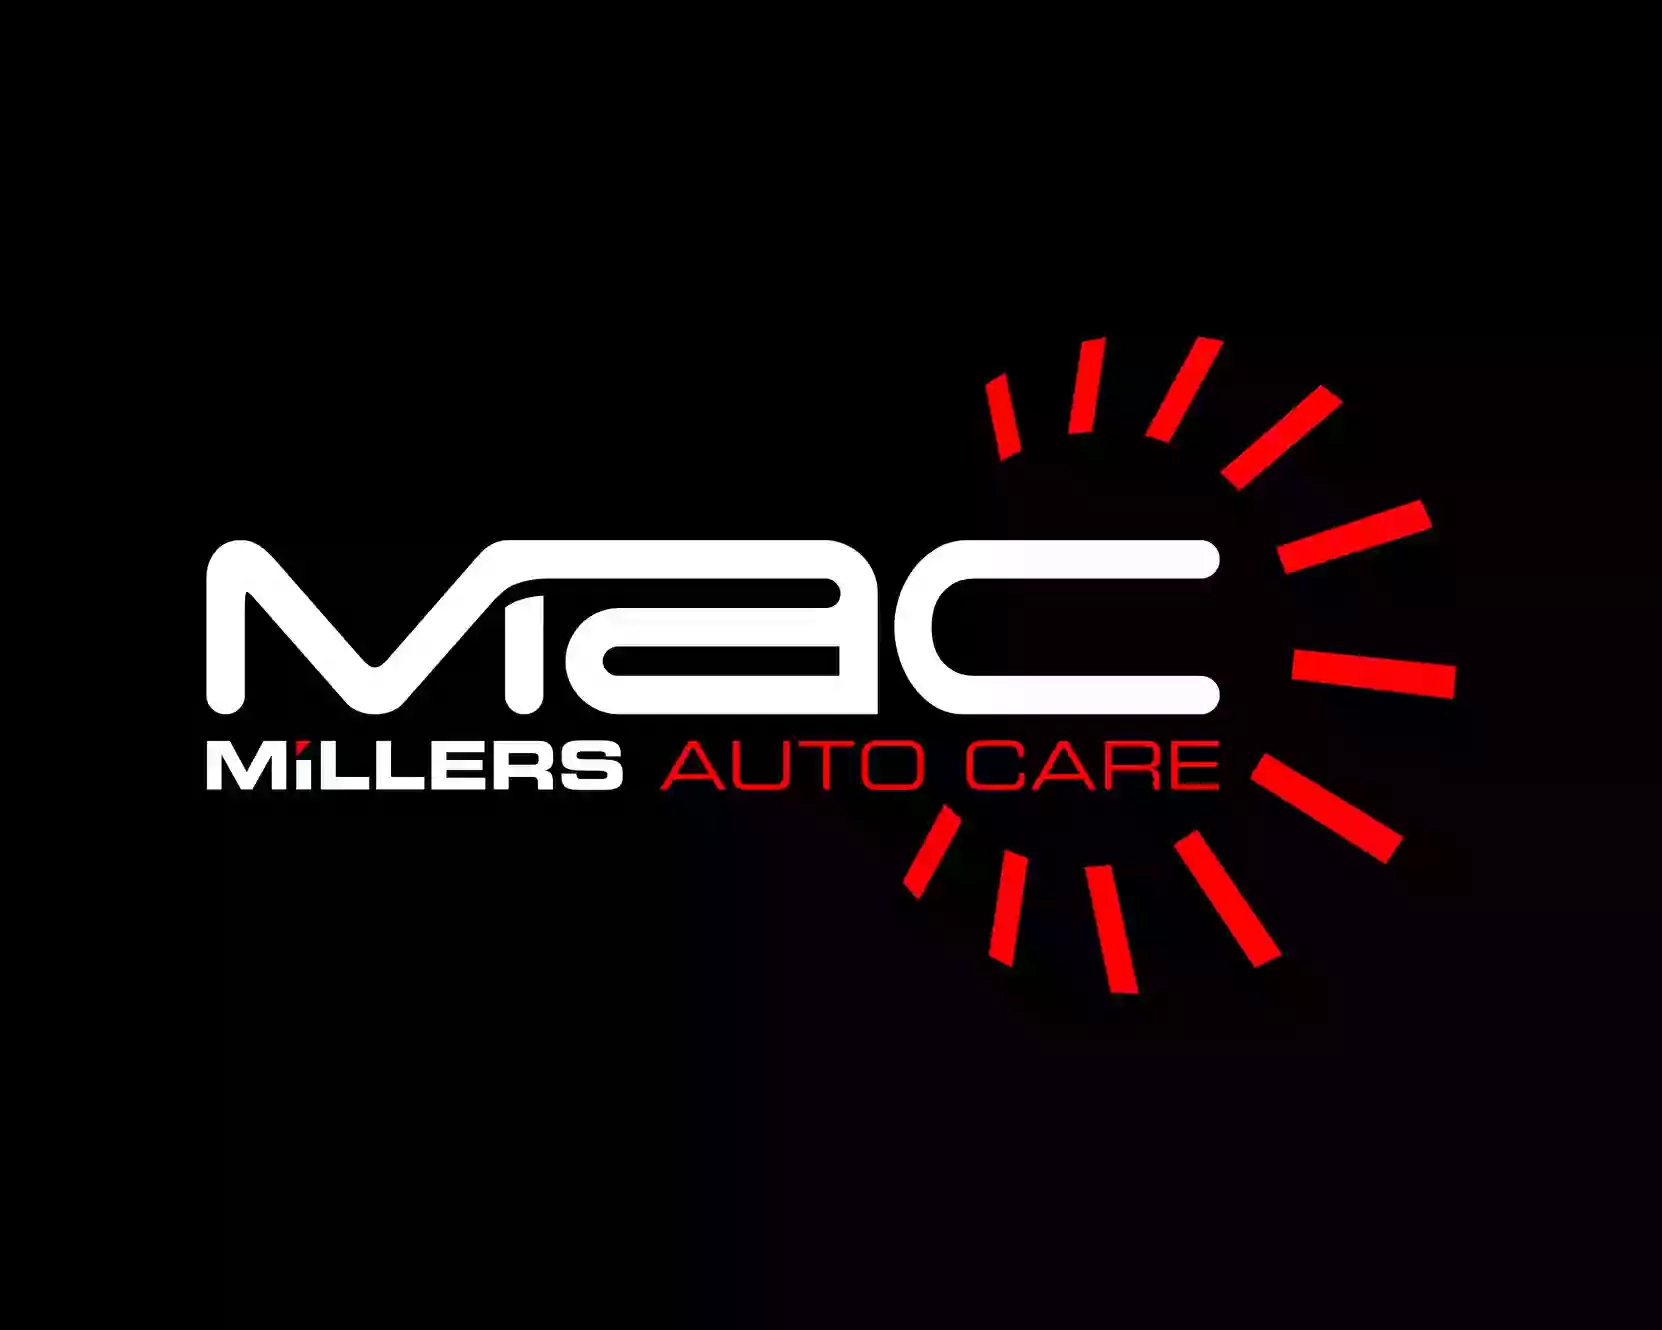 Millers Auto Care